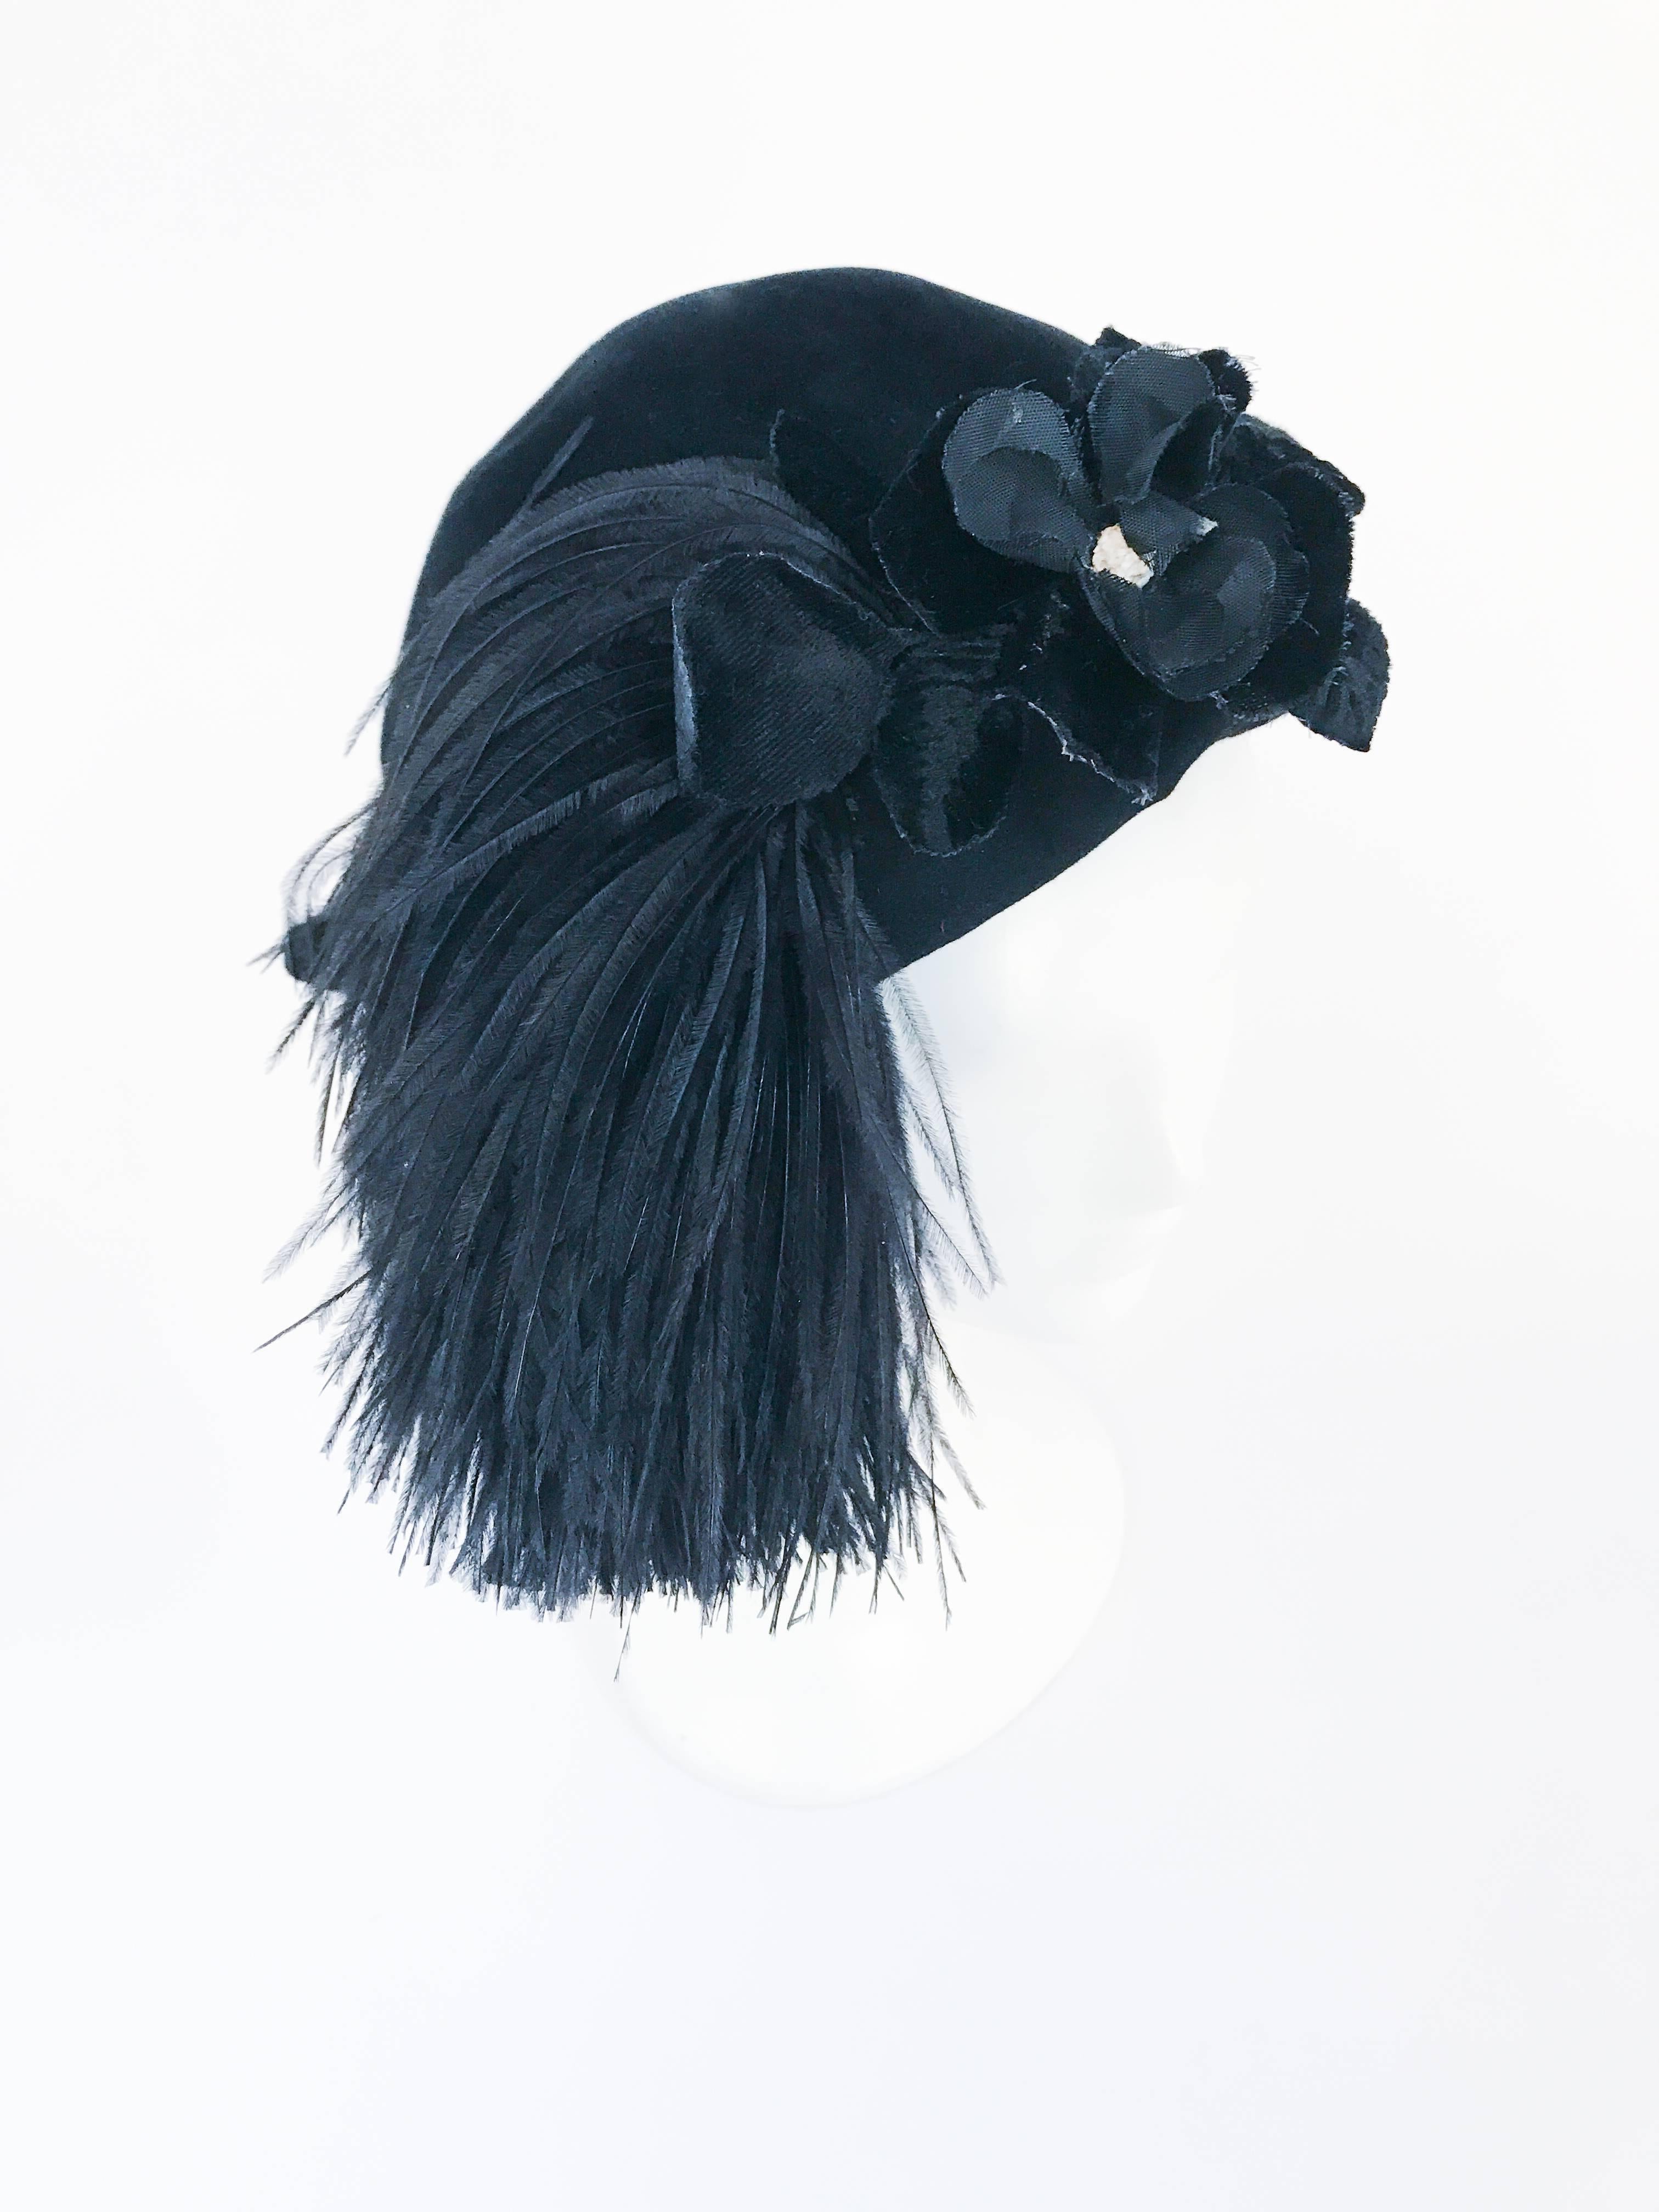 Women's 1950s Black Felt hat with Silk/Velvet Flower and Feather Accent